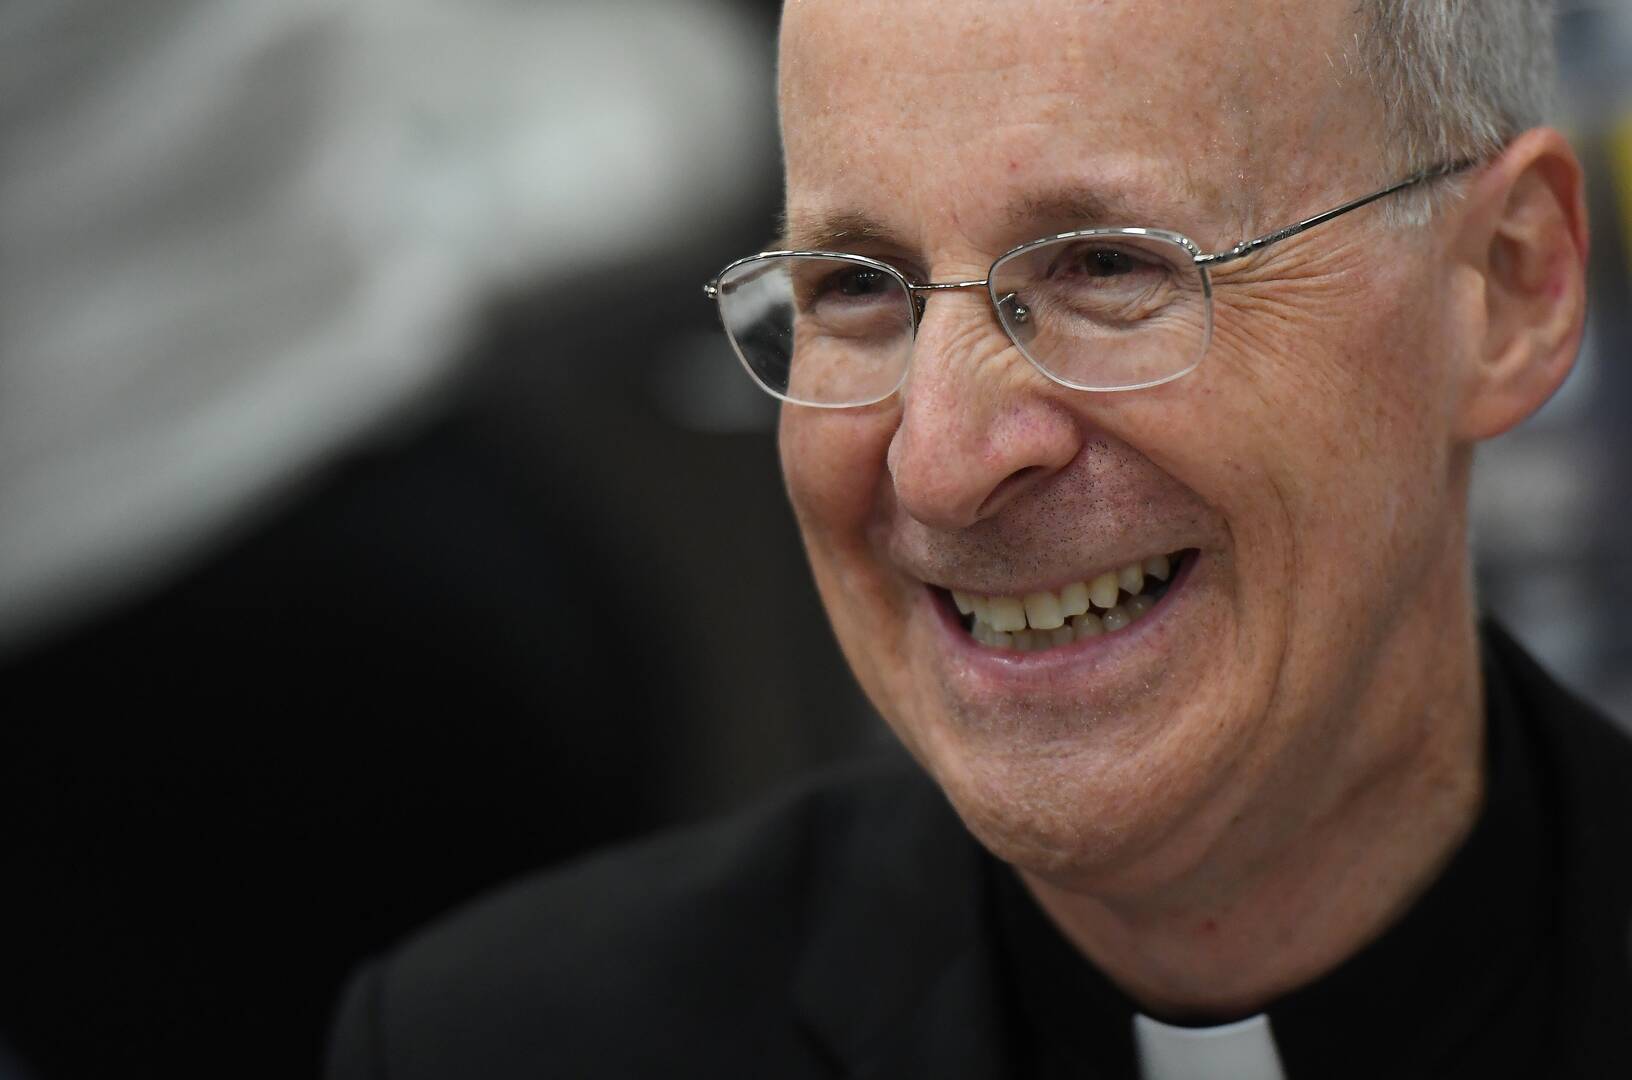 Jesuit Father James Martin, editor at large of America magazine, is seen in this 2018 file photo. He pre-recorded a benediction for the closing night of the Democratic National Convention Aug. 20, 2020. (CNS photo/Clodagh Kilcoyne, Reuters)